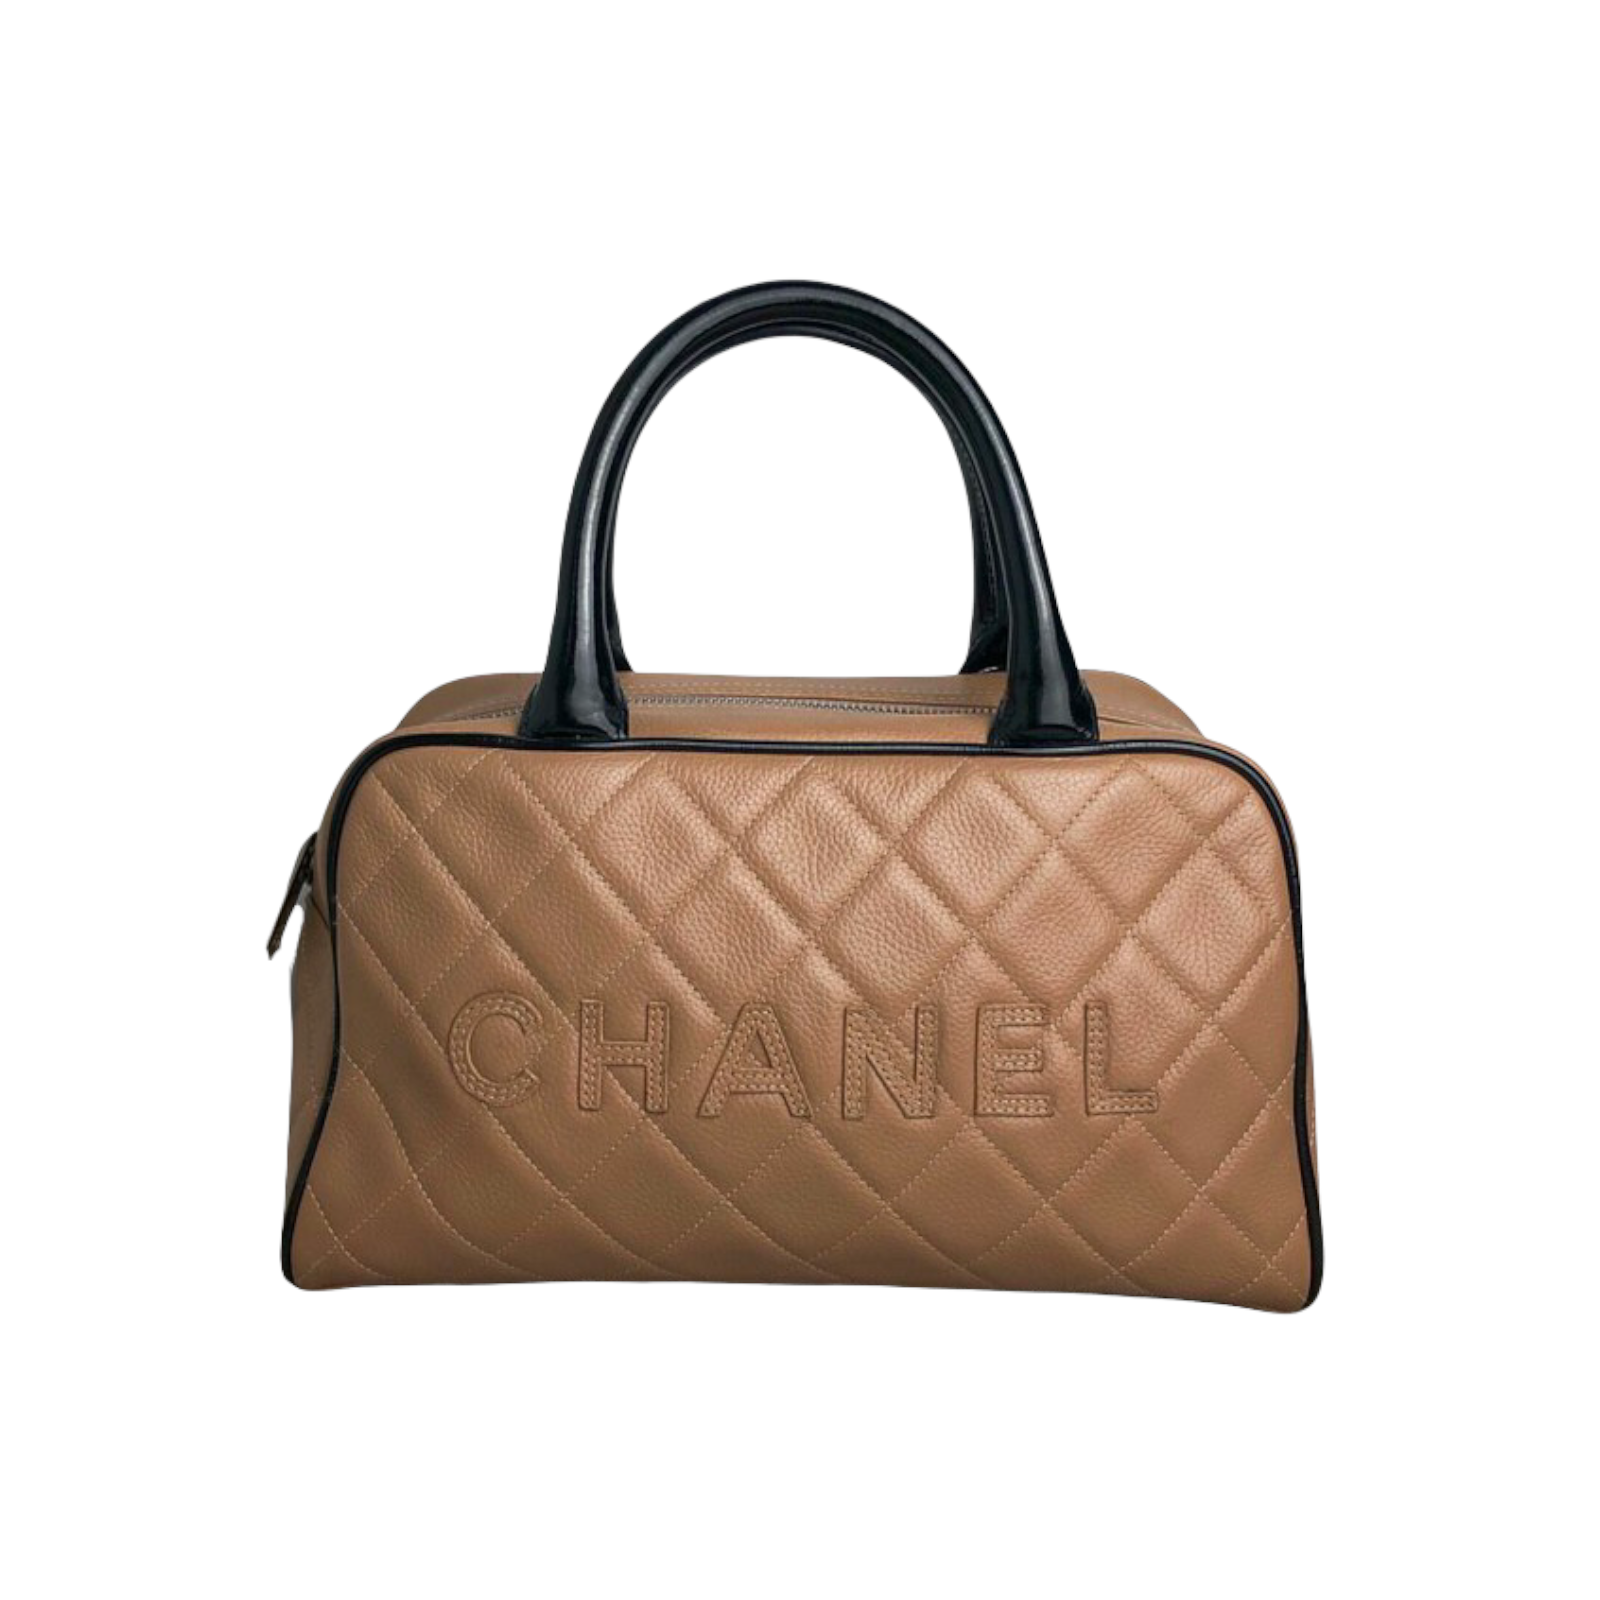 Chanel Square Quilted Caviar Leather Bowler Bag Brown Medium Handbag